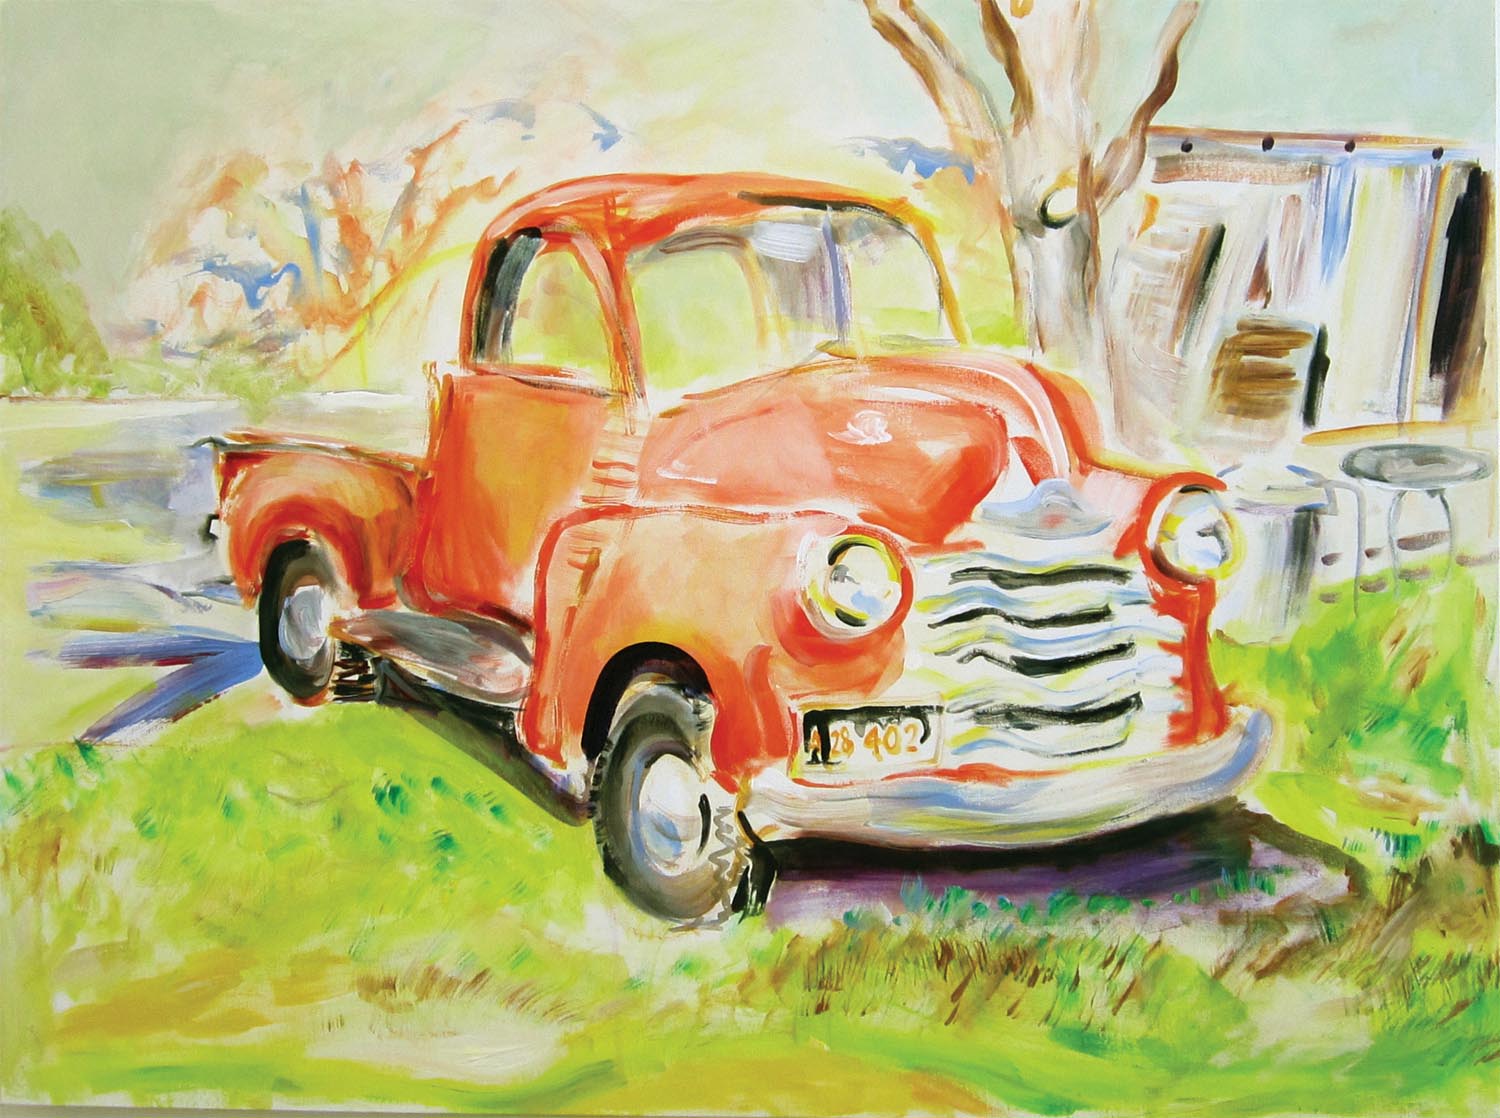 1953 Chevy Pickup Truck		acrylic on canvas	30” x 40”	2012